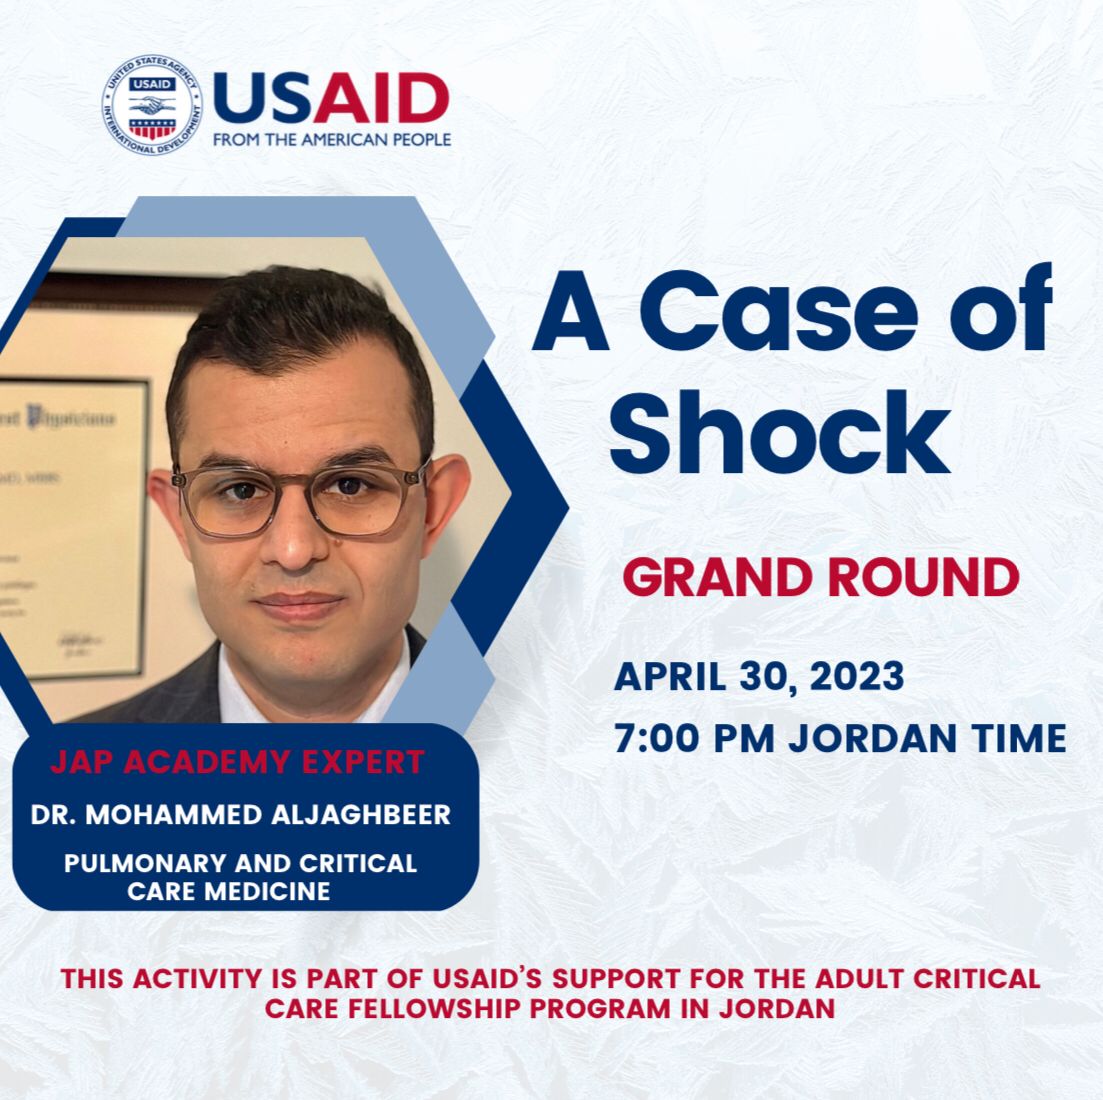 "A Case of Shock" Grand Round